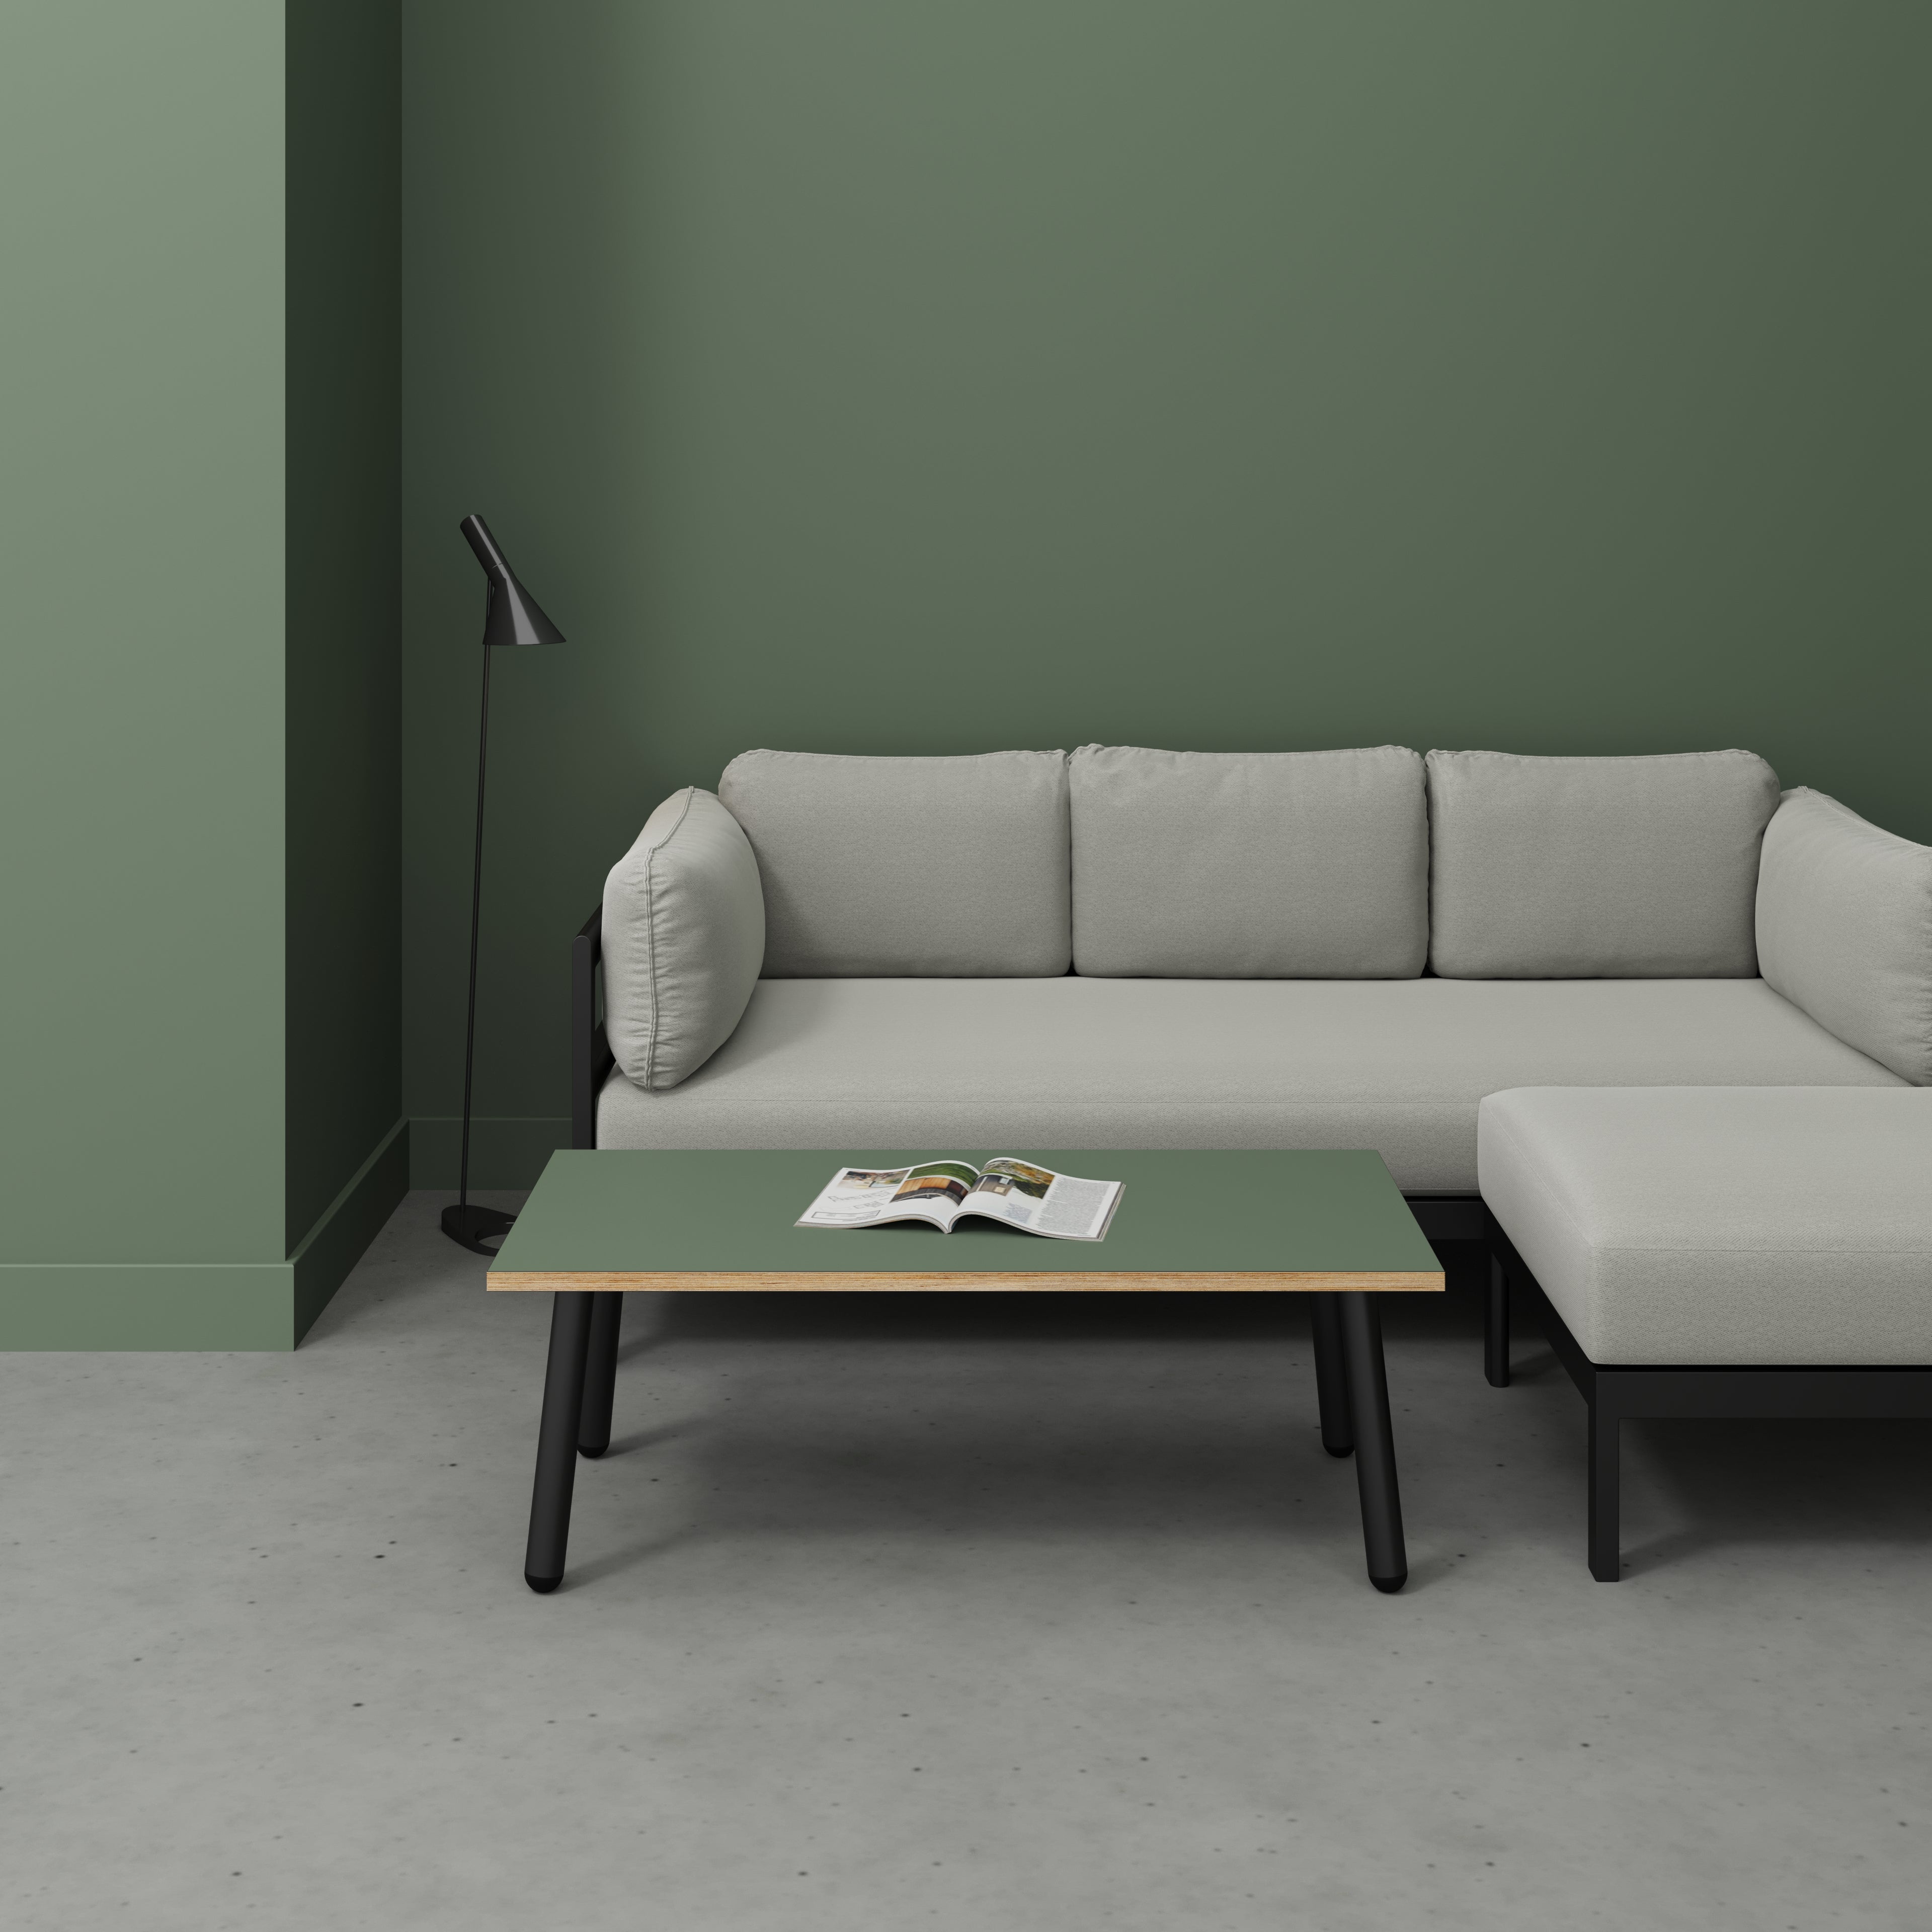 Coffee Table with Black Round Single Pin Legs - Formica Green Slate - 1200(w) x 600(d) x 425(h)